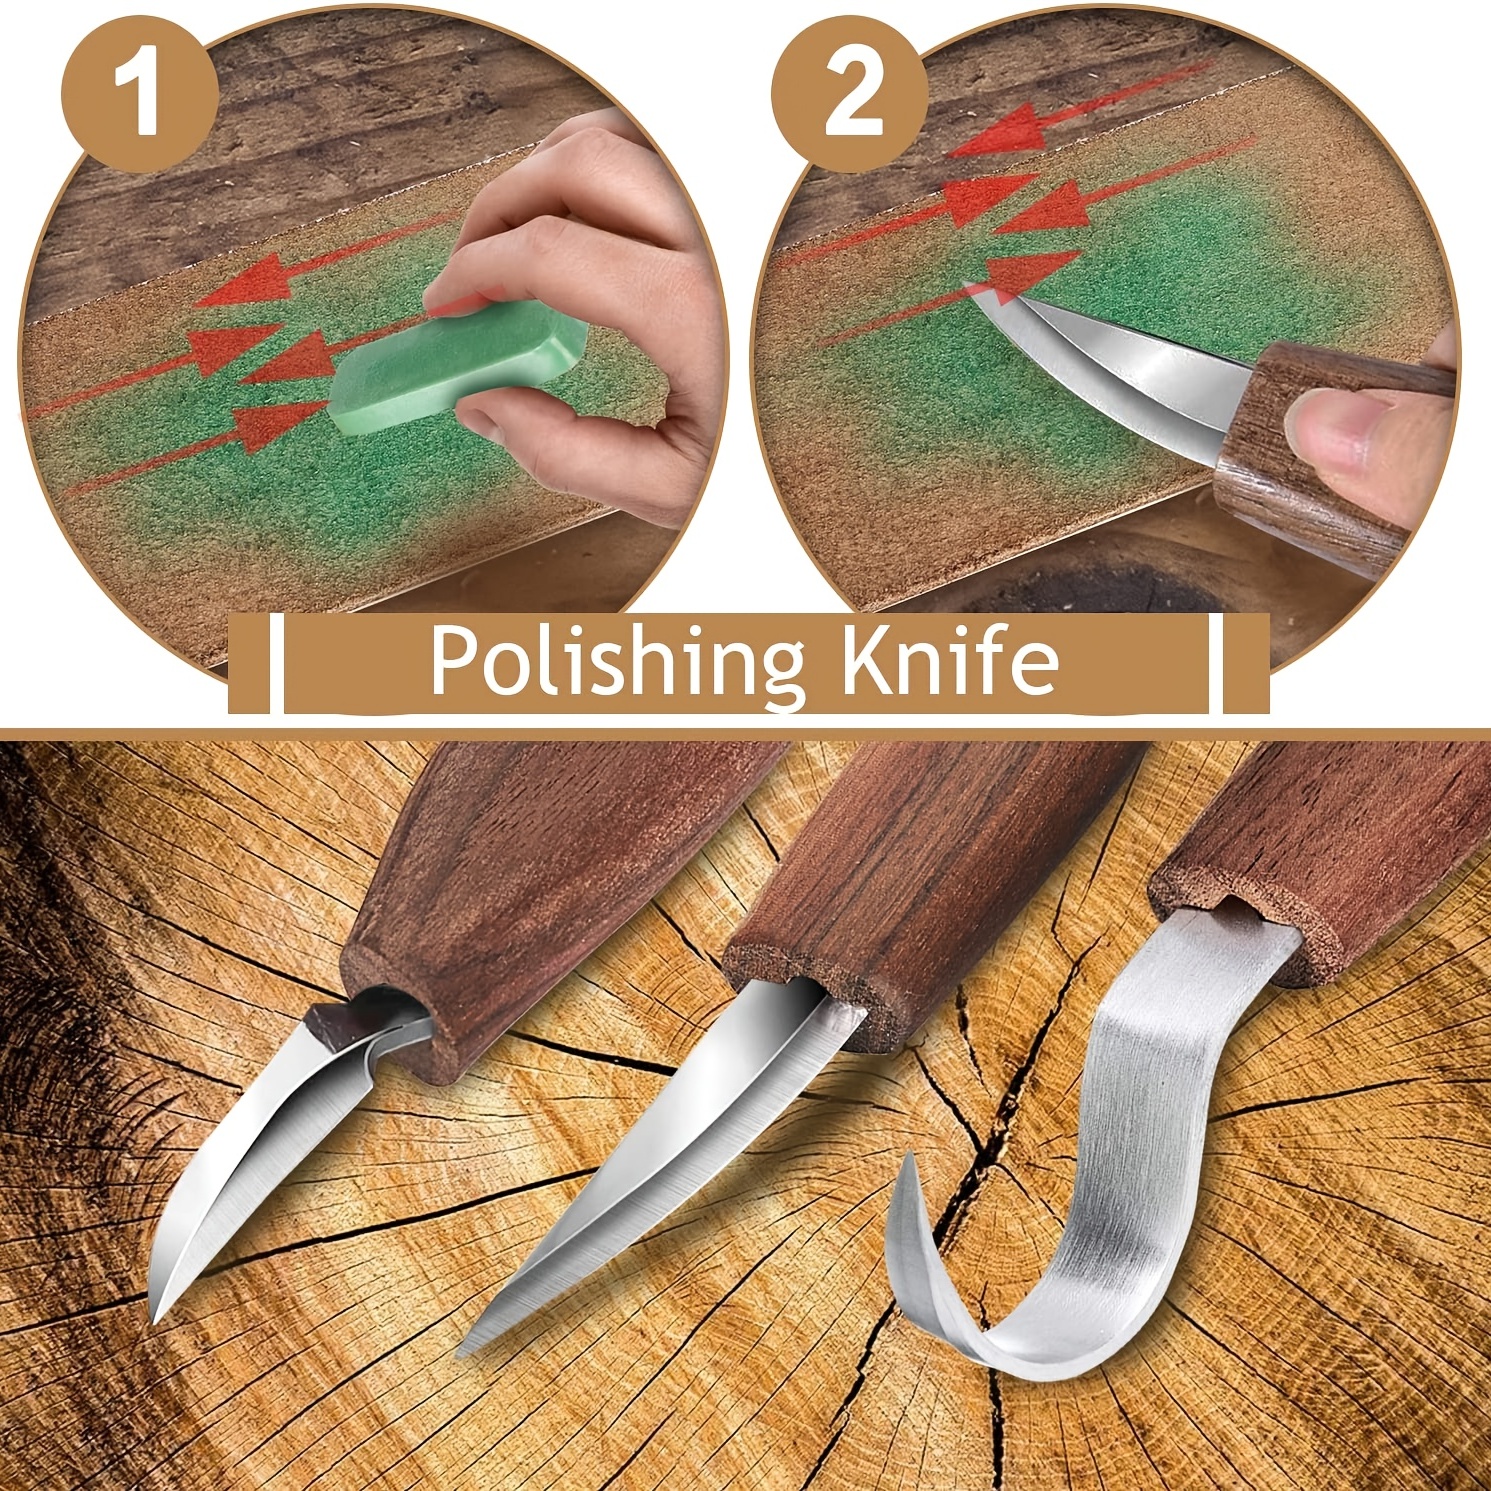 Wood Carving Kit Wood Carving Tool Polishing Compound Whittling